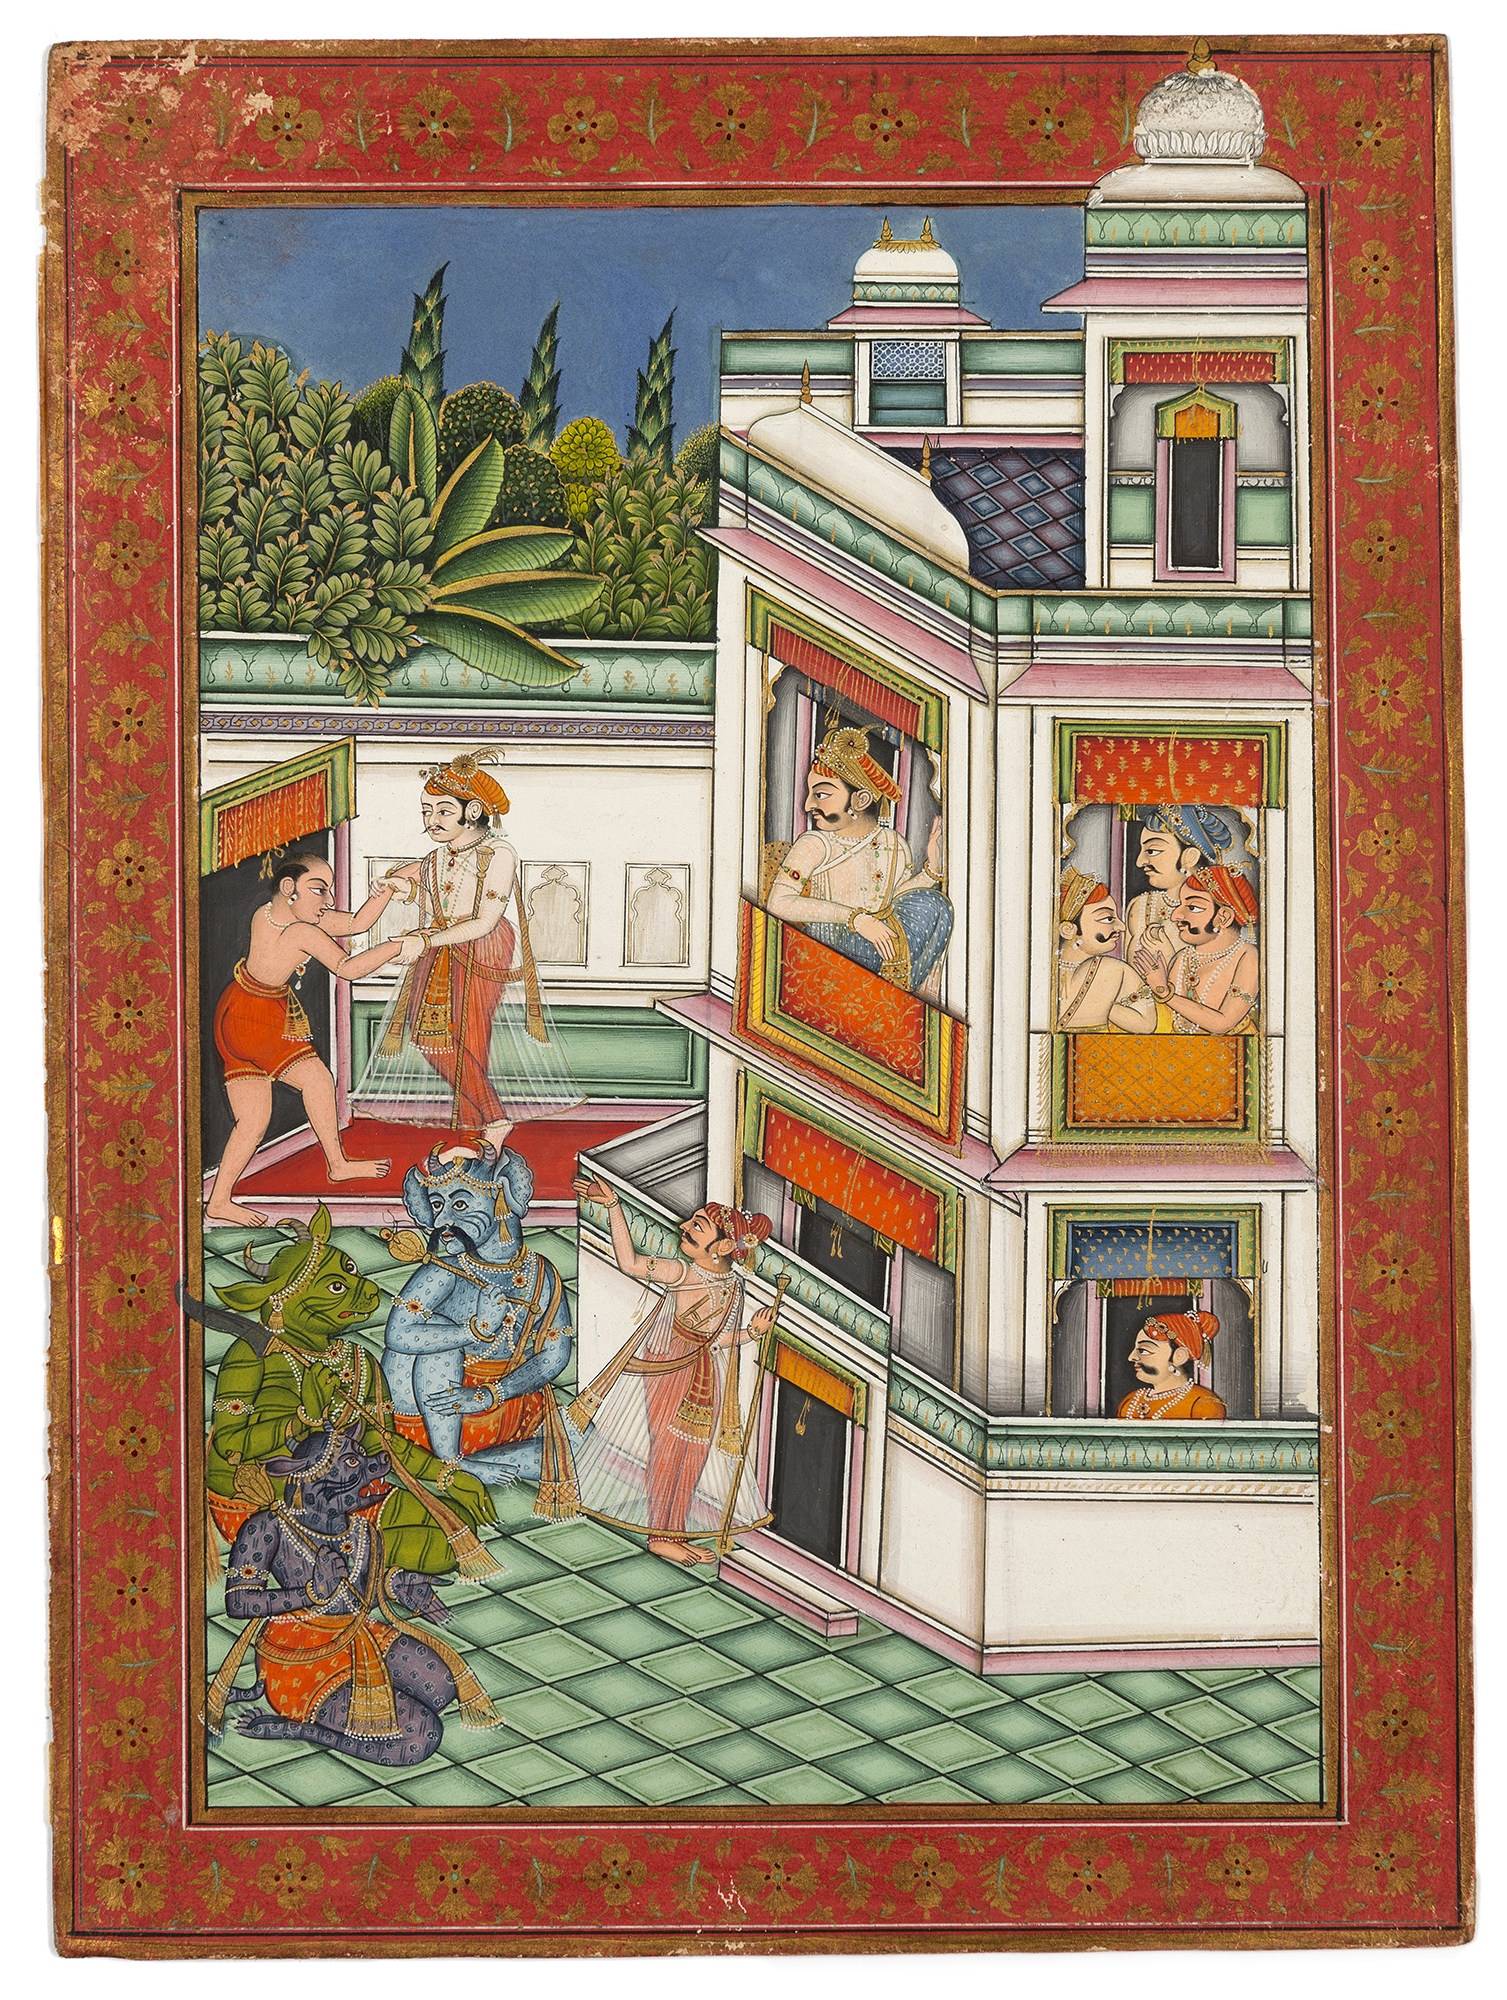 Painting of the exterior of a building, with multiple figures looking out the windows and three hybrid animal-human figures seated outside